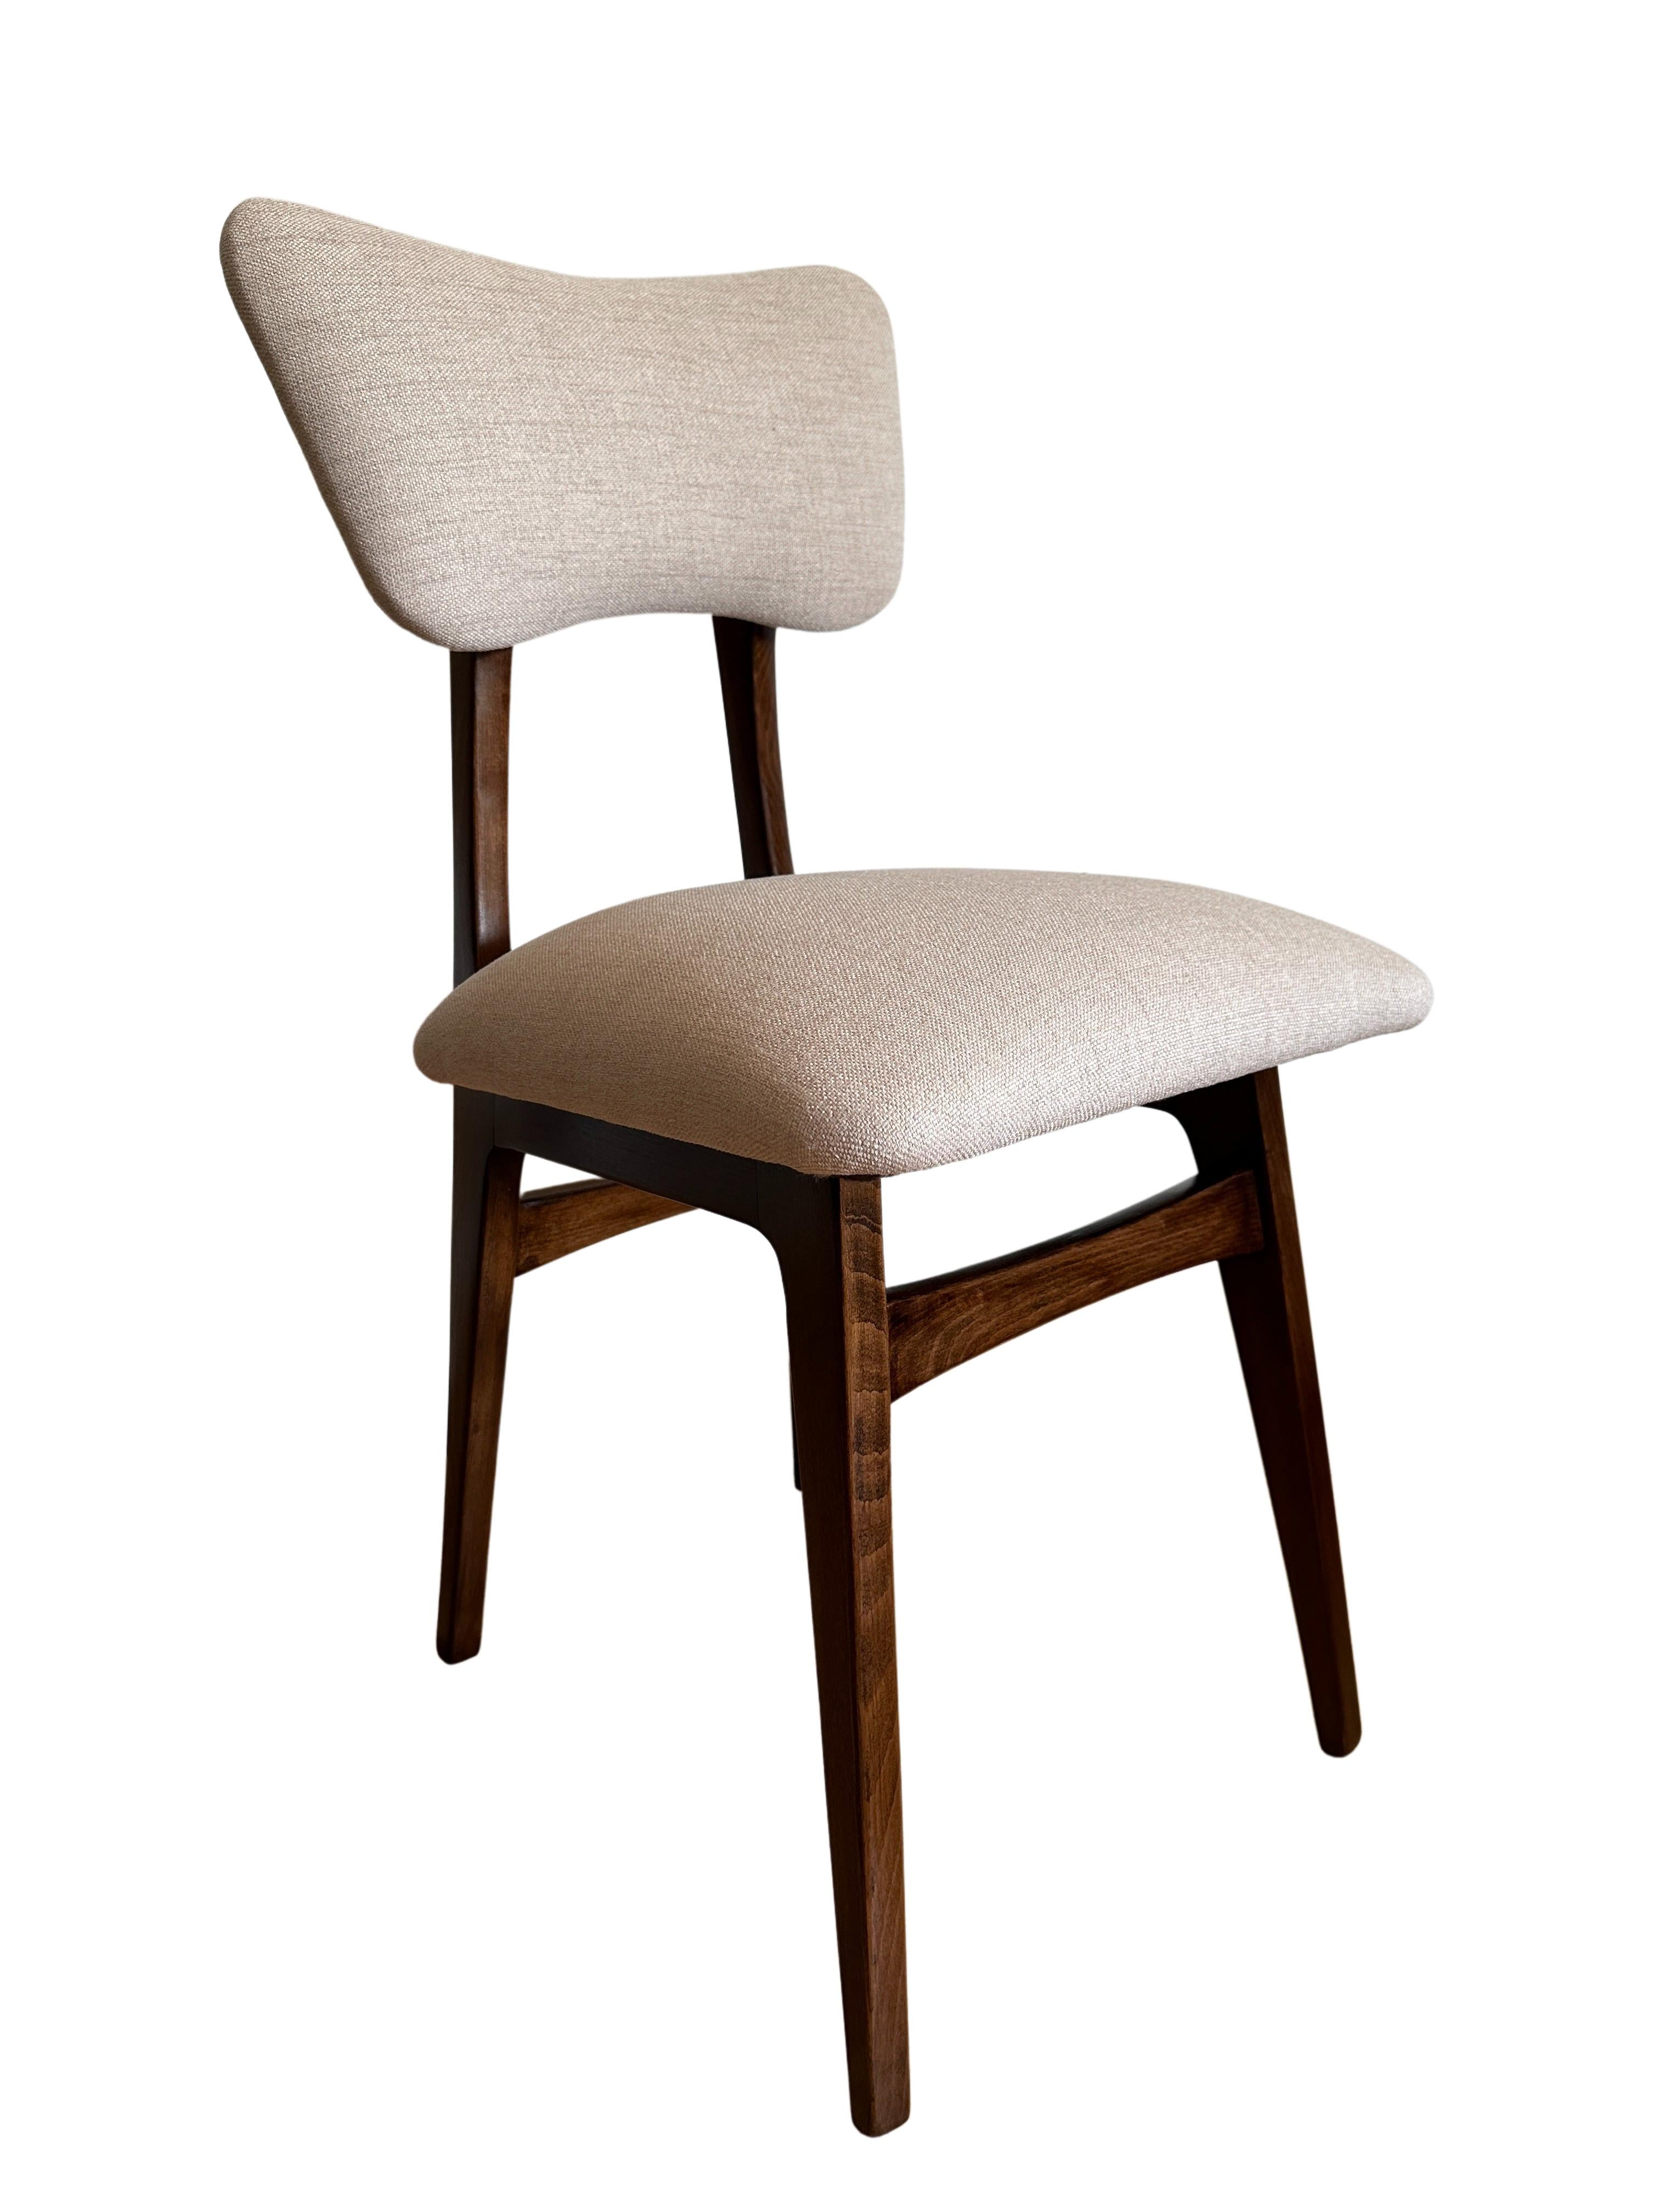 Set of 2 Midcentury Beige and Grey Dining Chairs, Europe, 1960s For Sale 2